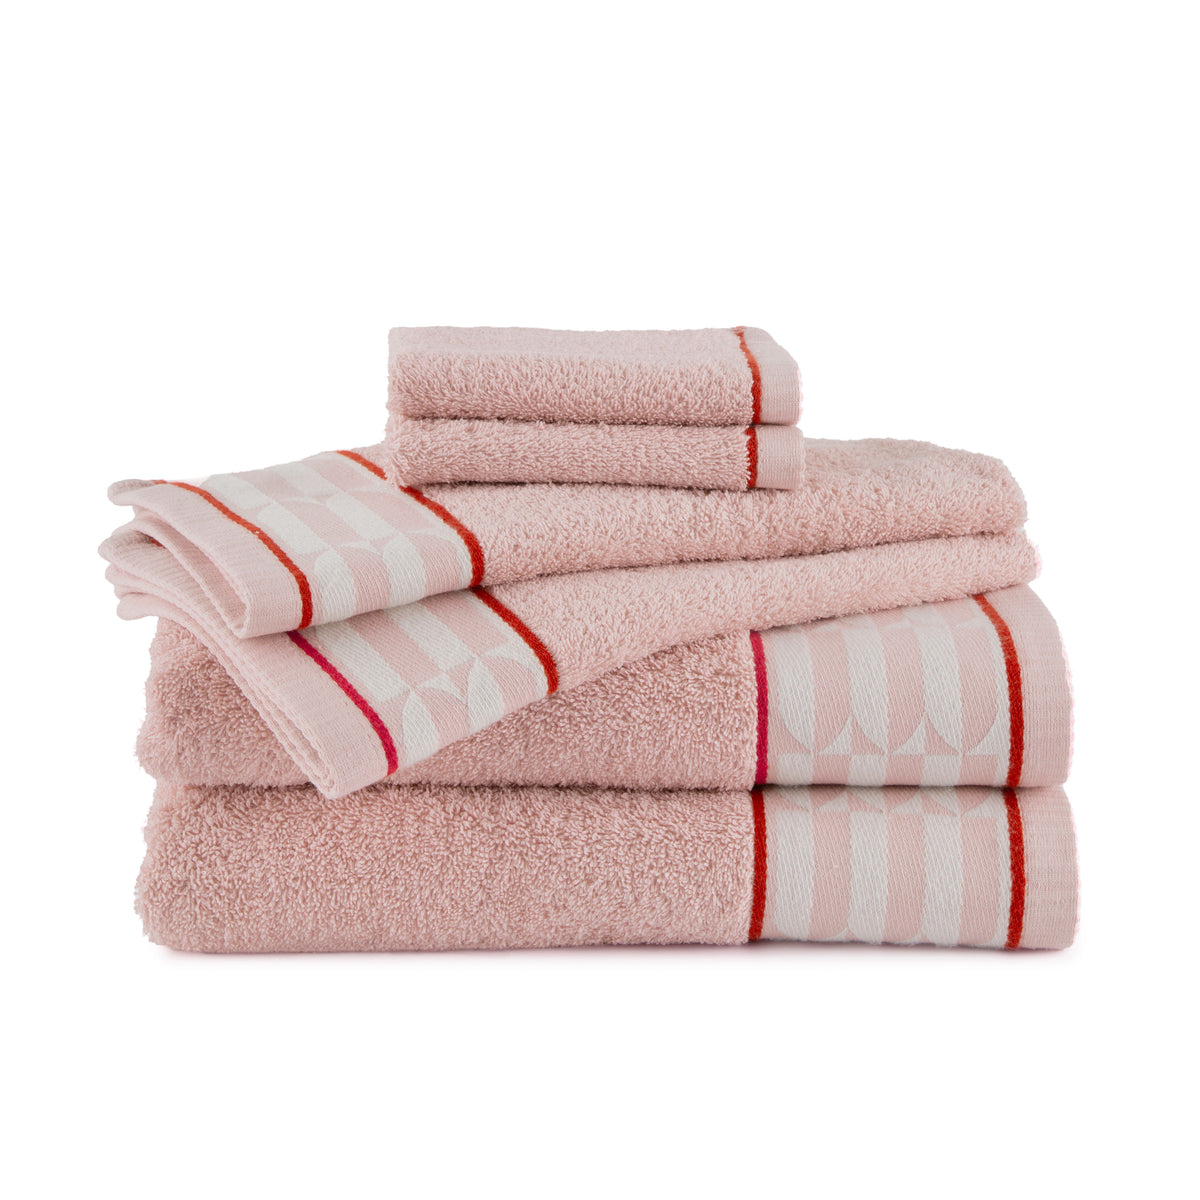 Couple of bath towels - Asti - Pink From Filet - Bathroom - Ready to Stitch  - Casa Cenina